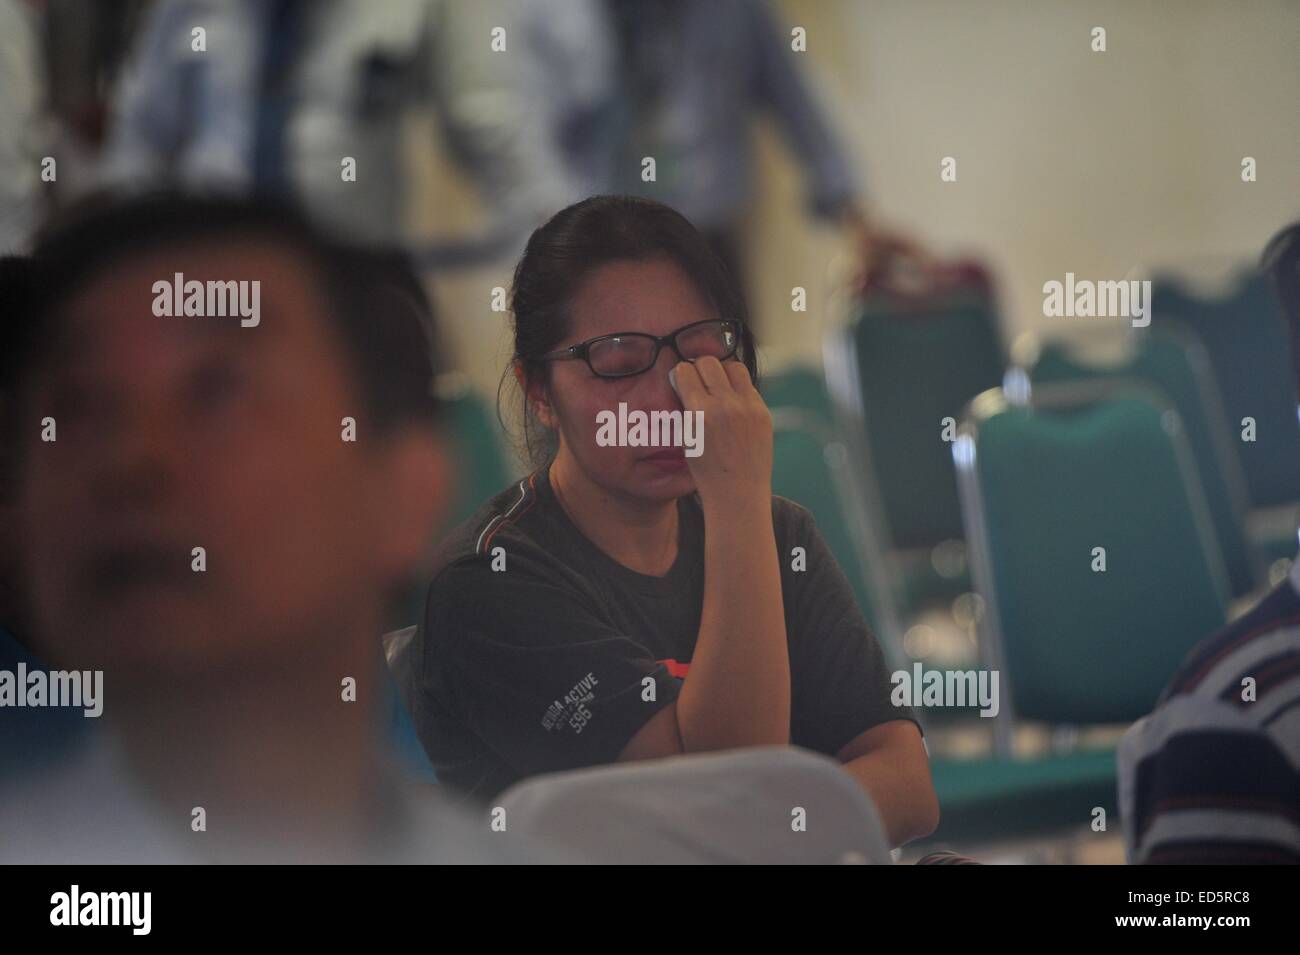 Surabaya, Indonesia. 29th Dec, 2014. A woman wipes tears as family members of passengers on AirAsia Flight QZ8501 gather at Juanda International Airport in Surabaya, Indonesia, Dec. 29, 2014. Air Asia Indonesia has released information about the 162 passengers and crew members on Flight QZ8501, which lost contact with the air traffic control Sunday morning. Credit:  Zulkarnain/Xinhua/Alamy Live News Stock Photo